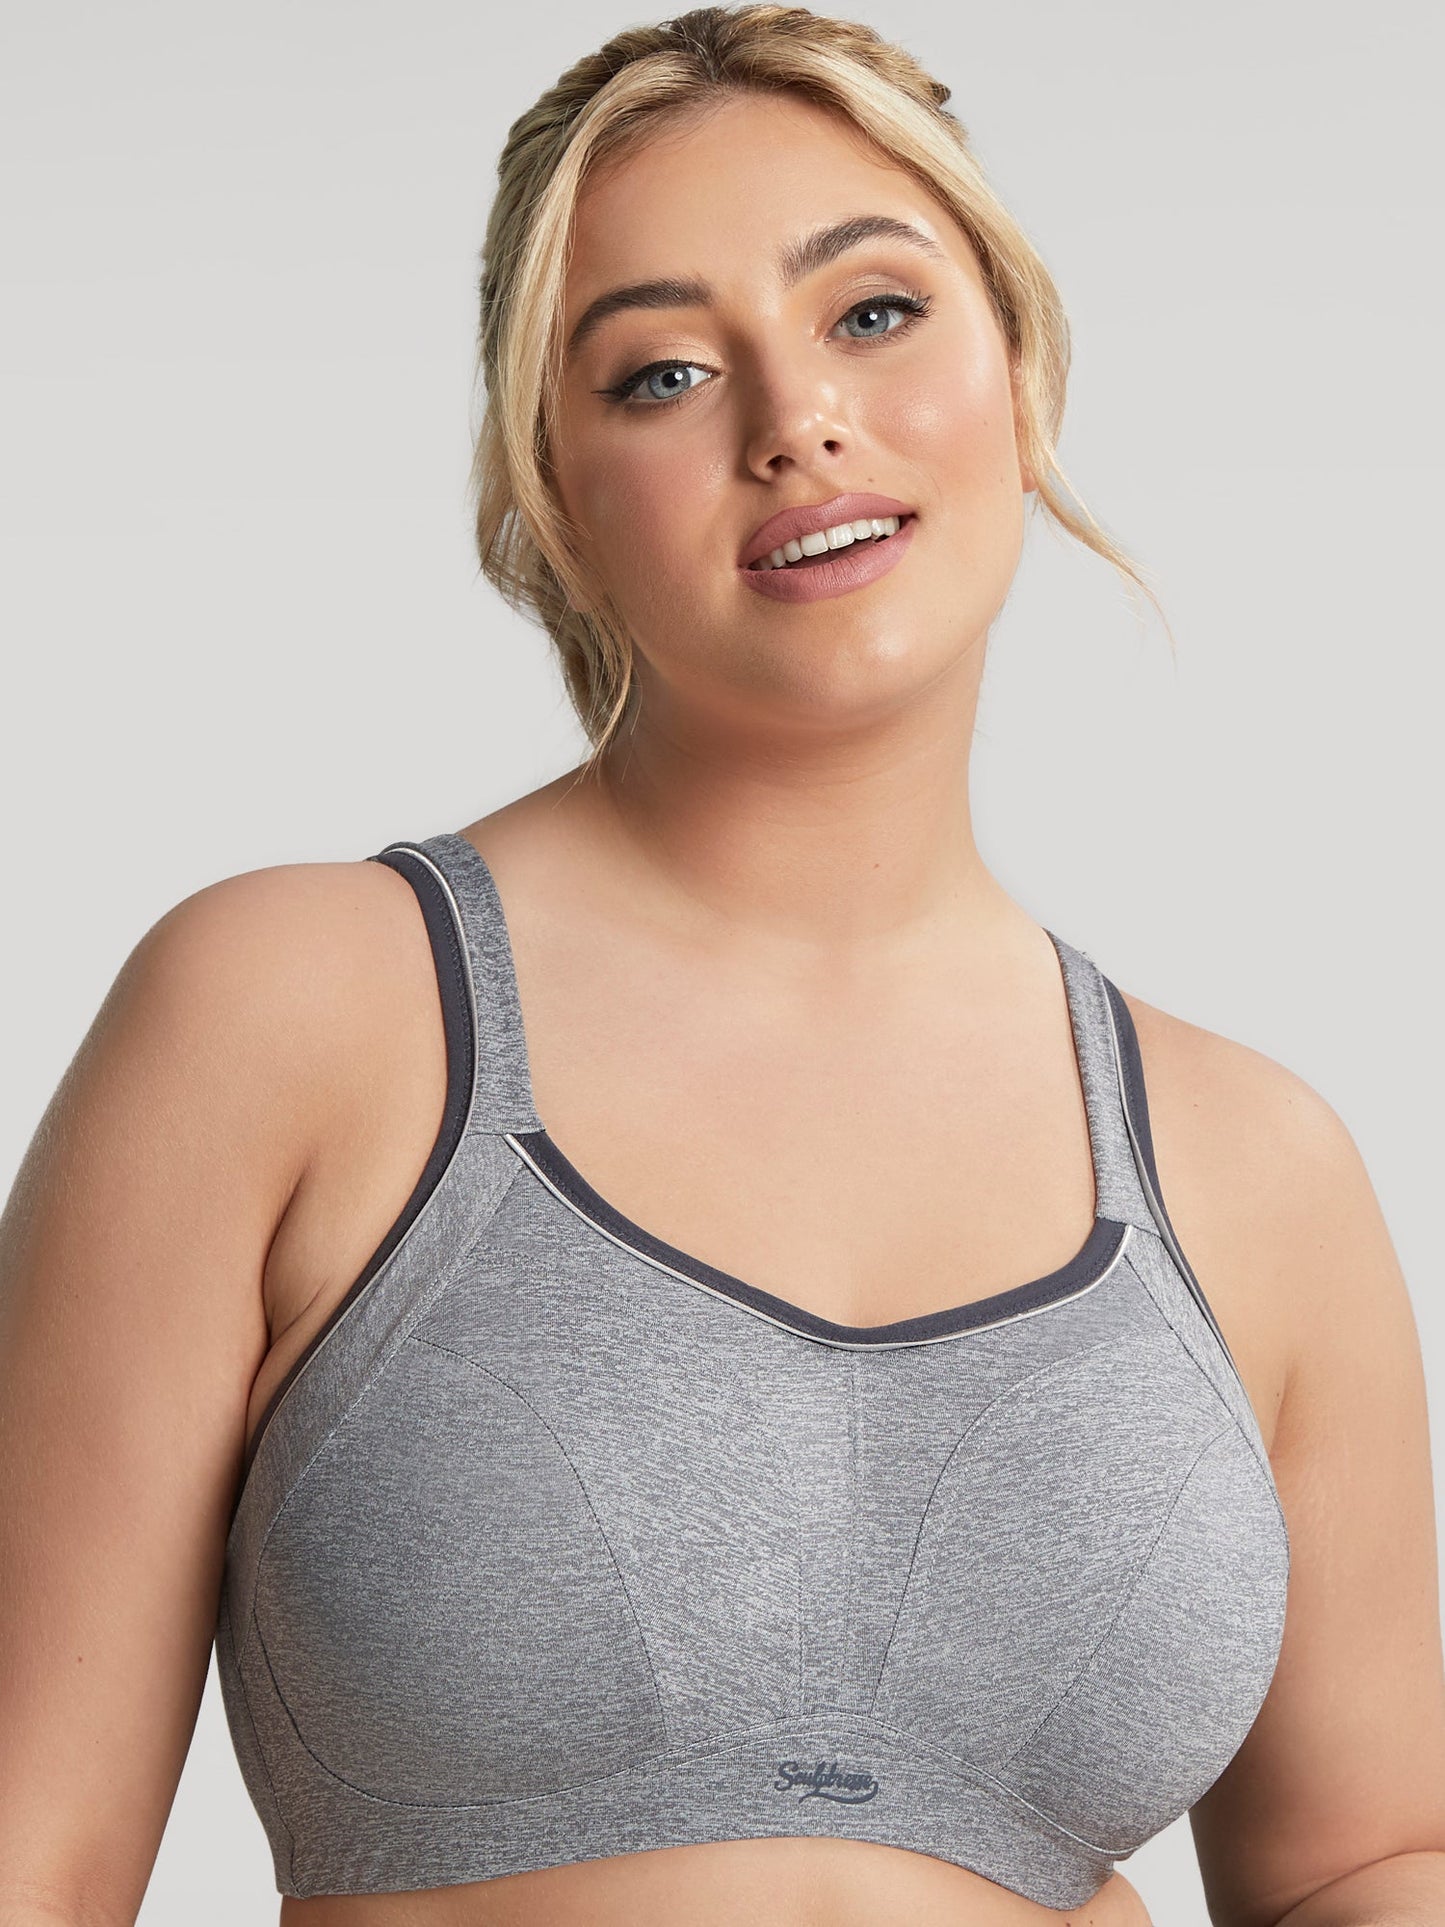 Molded Wired Sports Bra by Panache - Pinned Up Bra Lounge